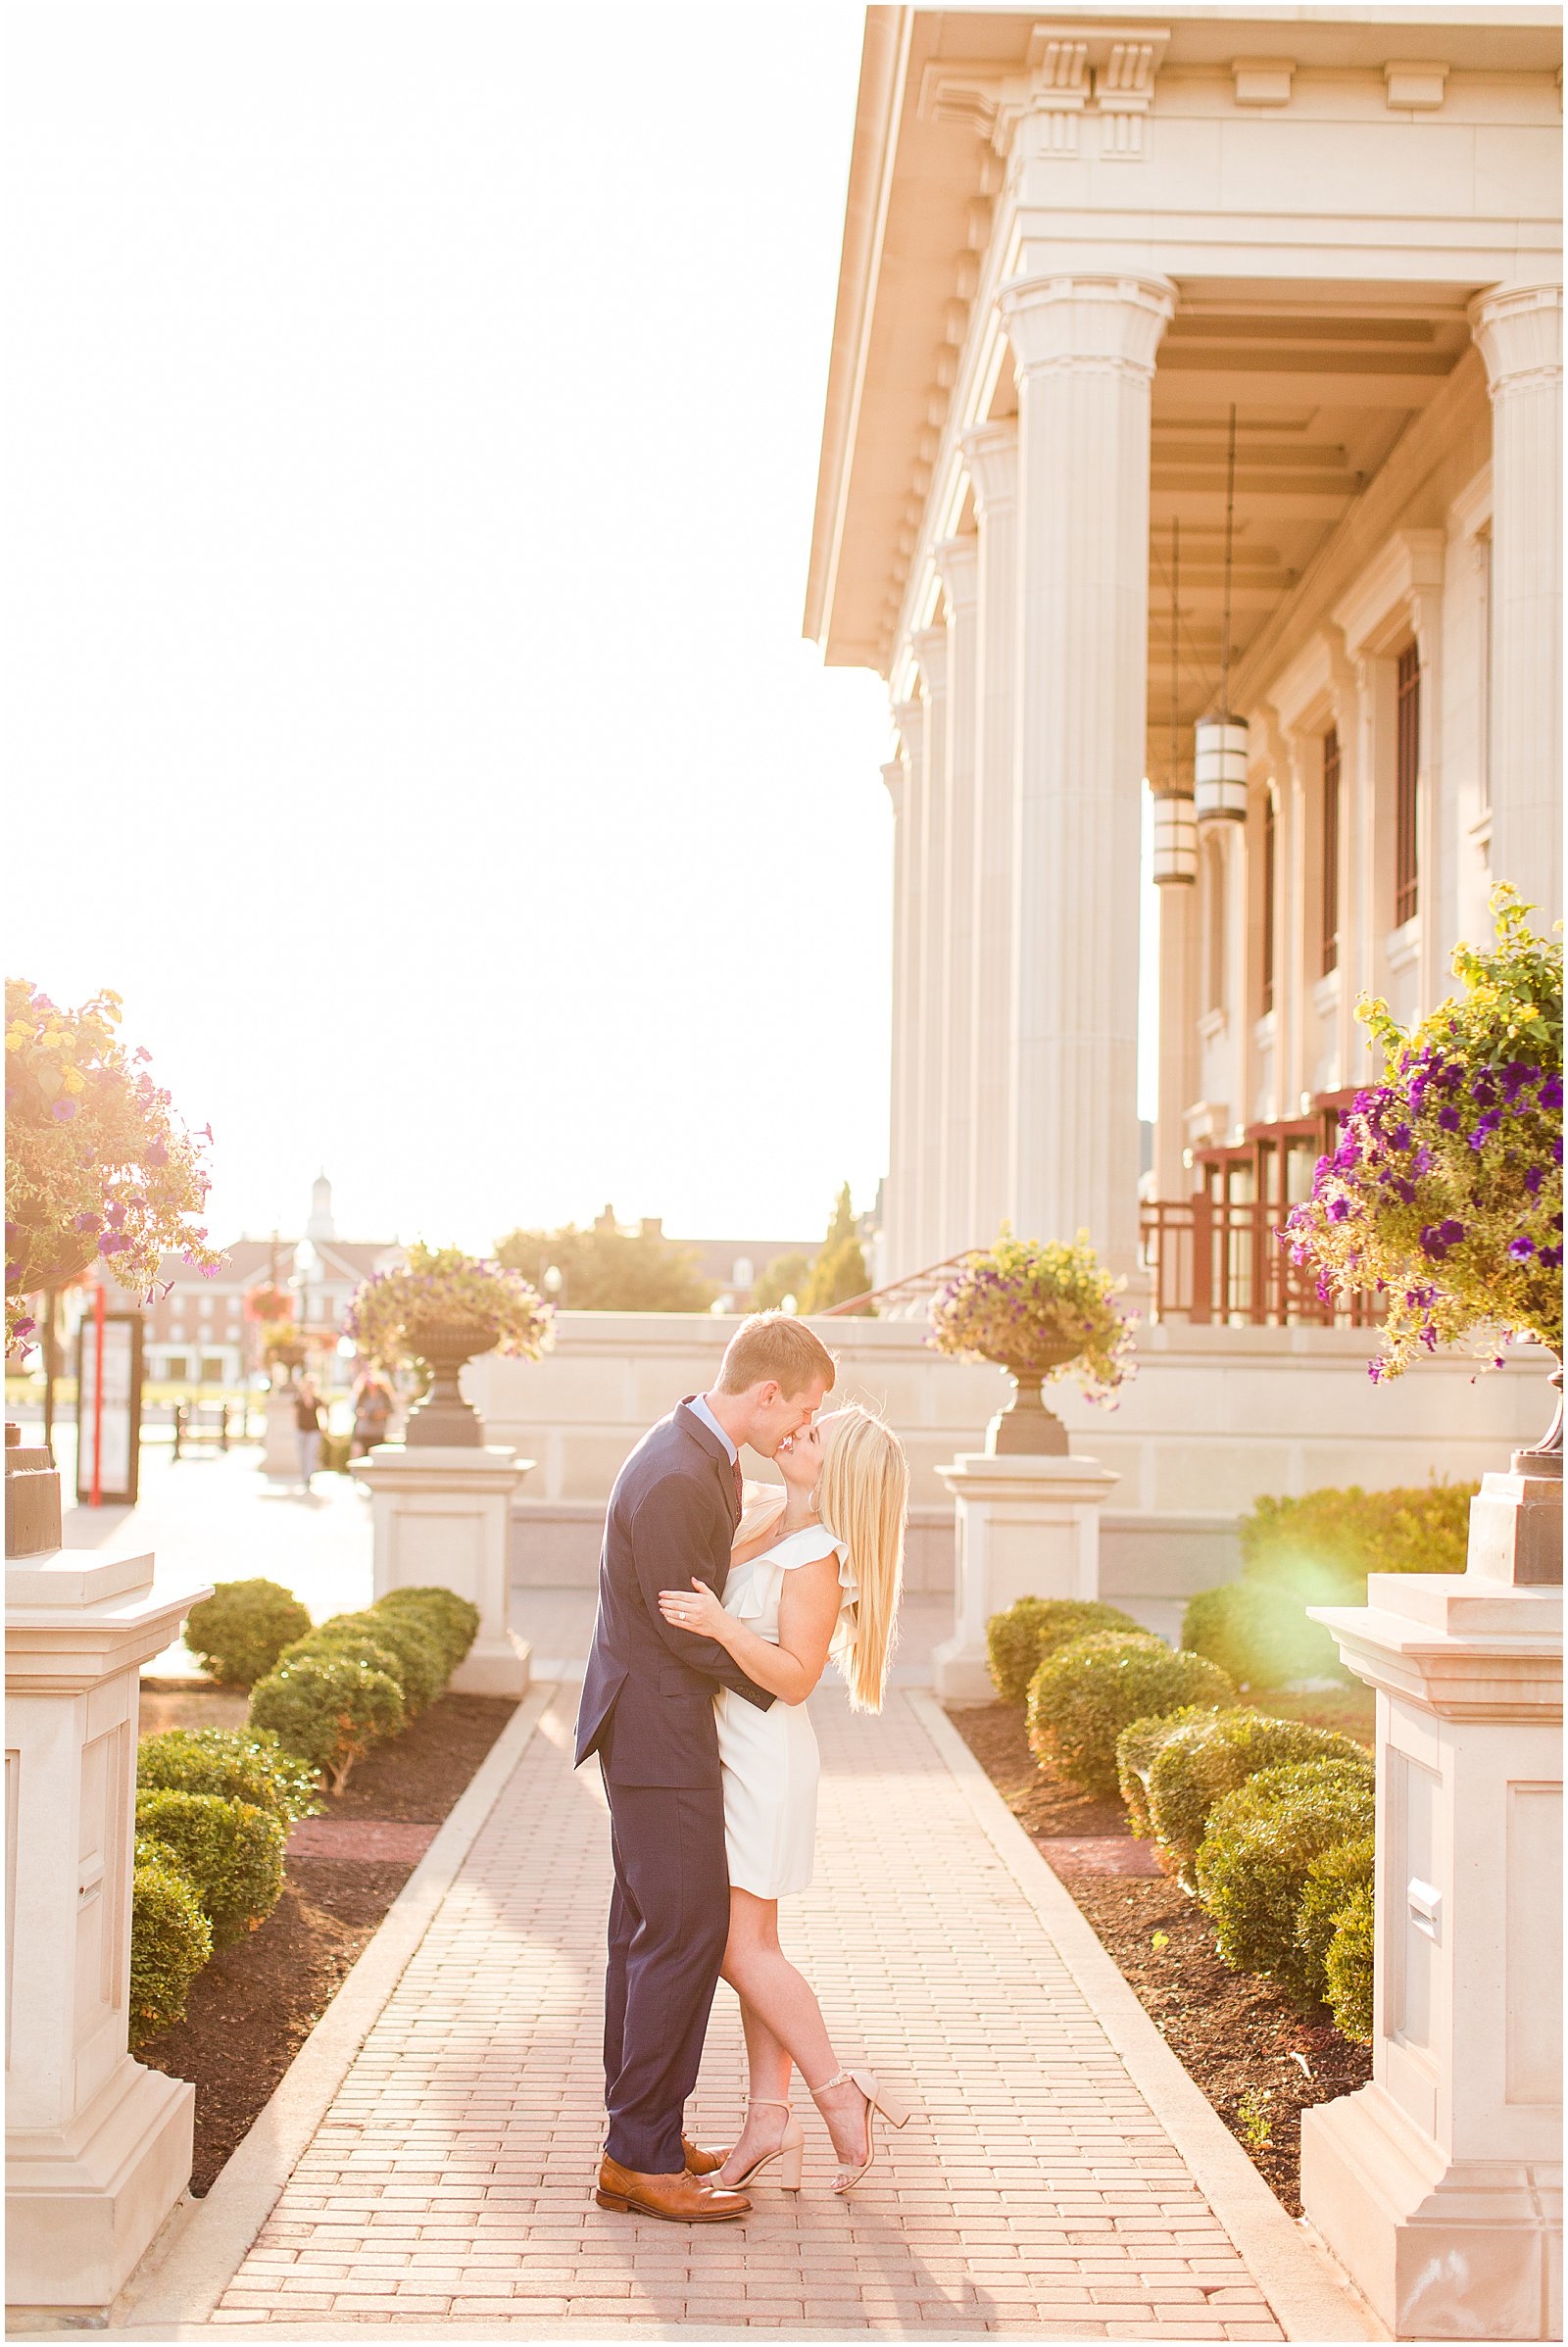 A Cute and Cuddly Engagement Session in Carmel, IN | Abbi and Josh0017.jpg